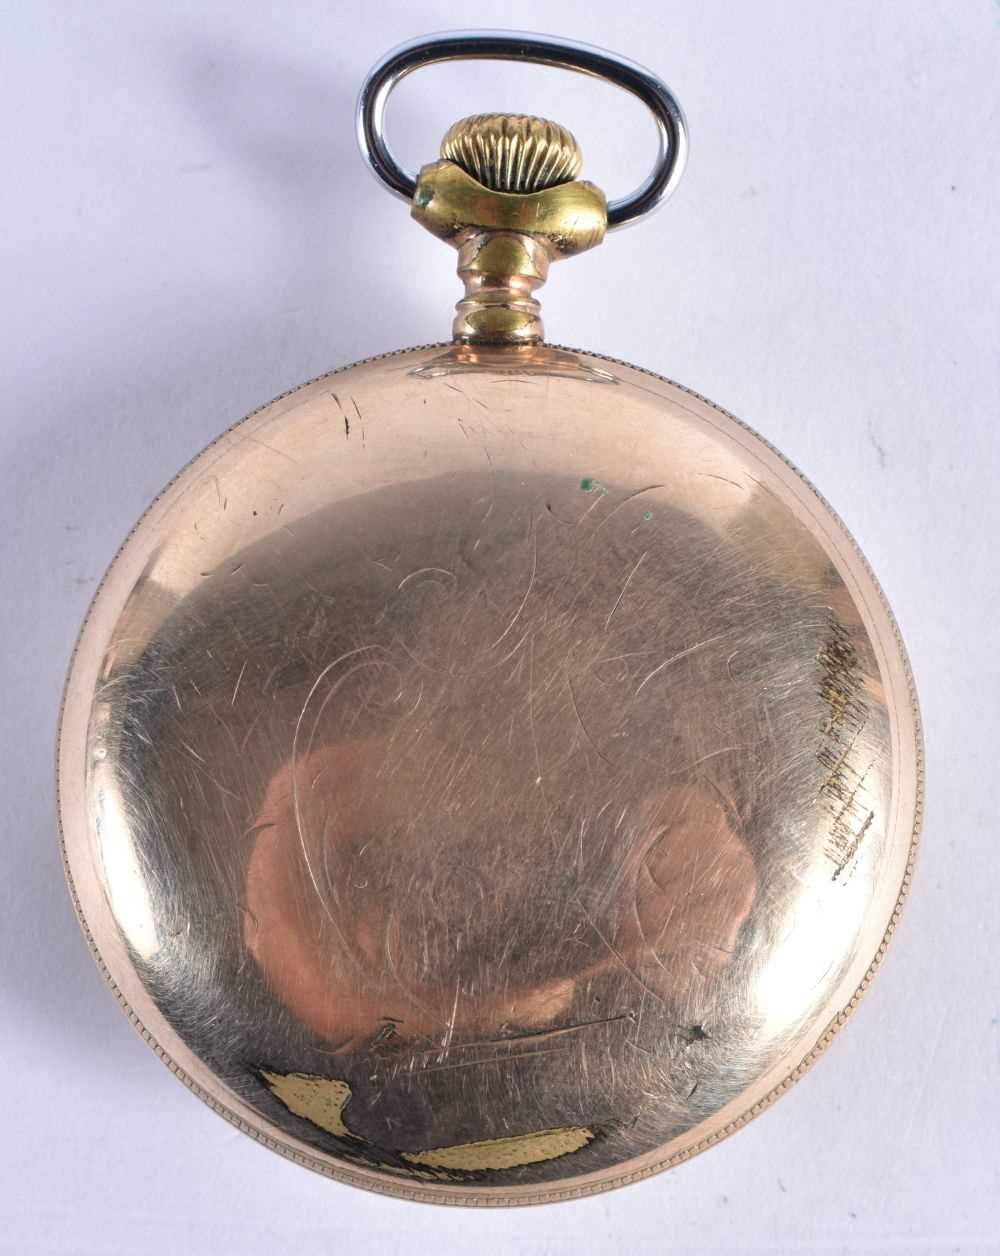 WALTHAM Gents Rolled Gold Open Face Pocket Watch.  Movement - Hand-wind.  WORKING - Tested For Time. - Image 3 of 3